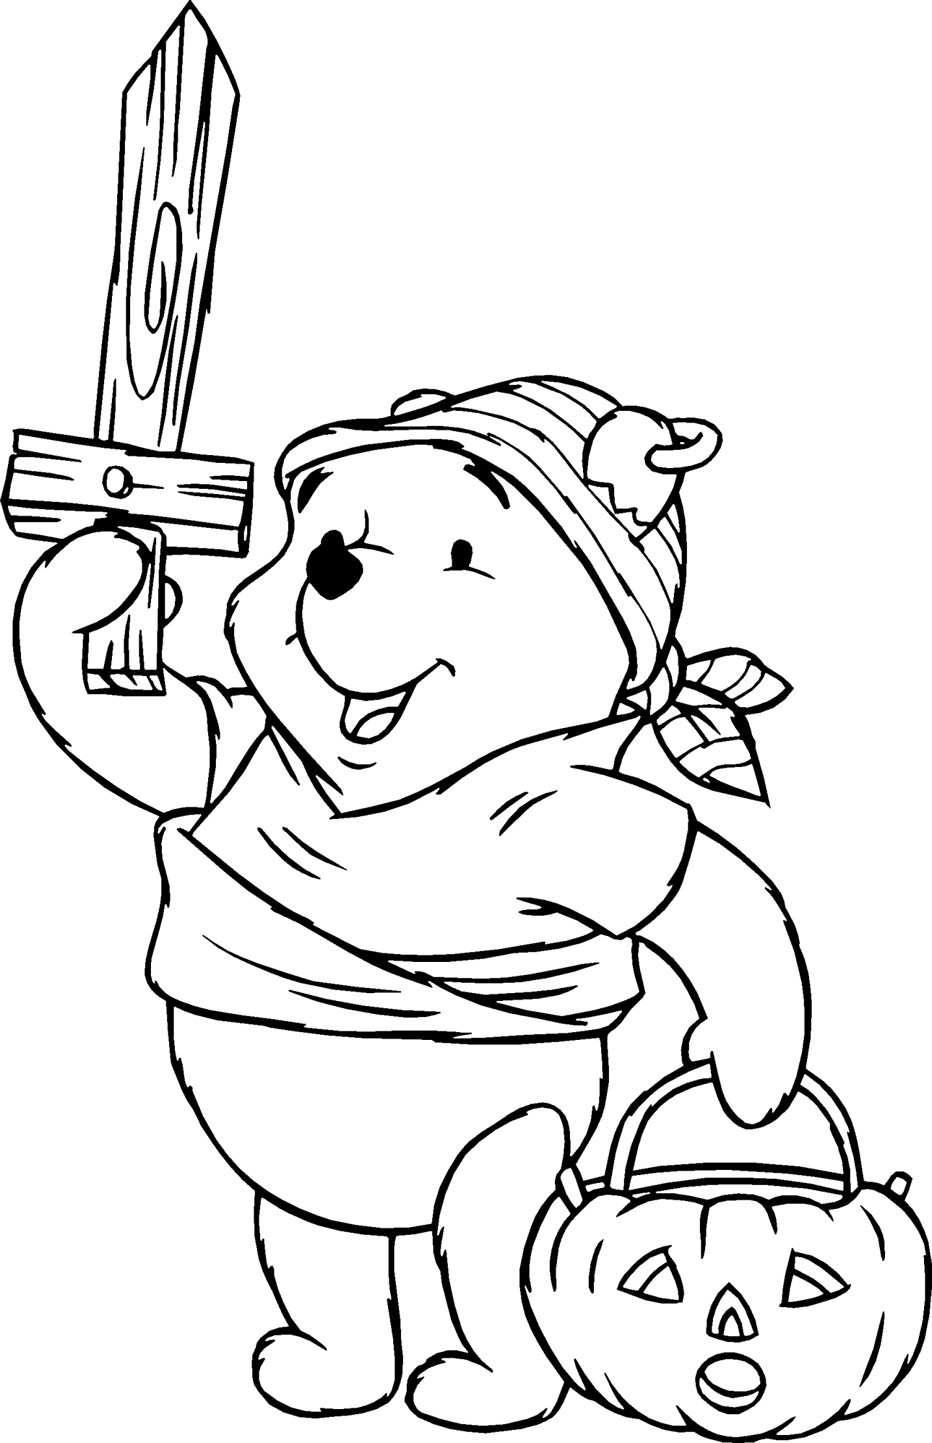 Printable Coloring For Kids
 24 Free Printable Halloween Coloring Pages for Kids